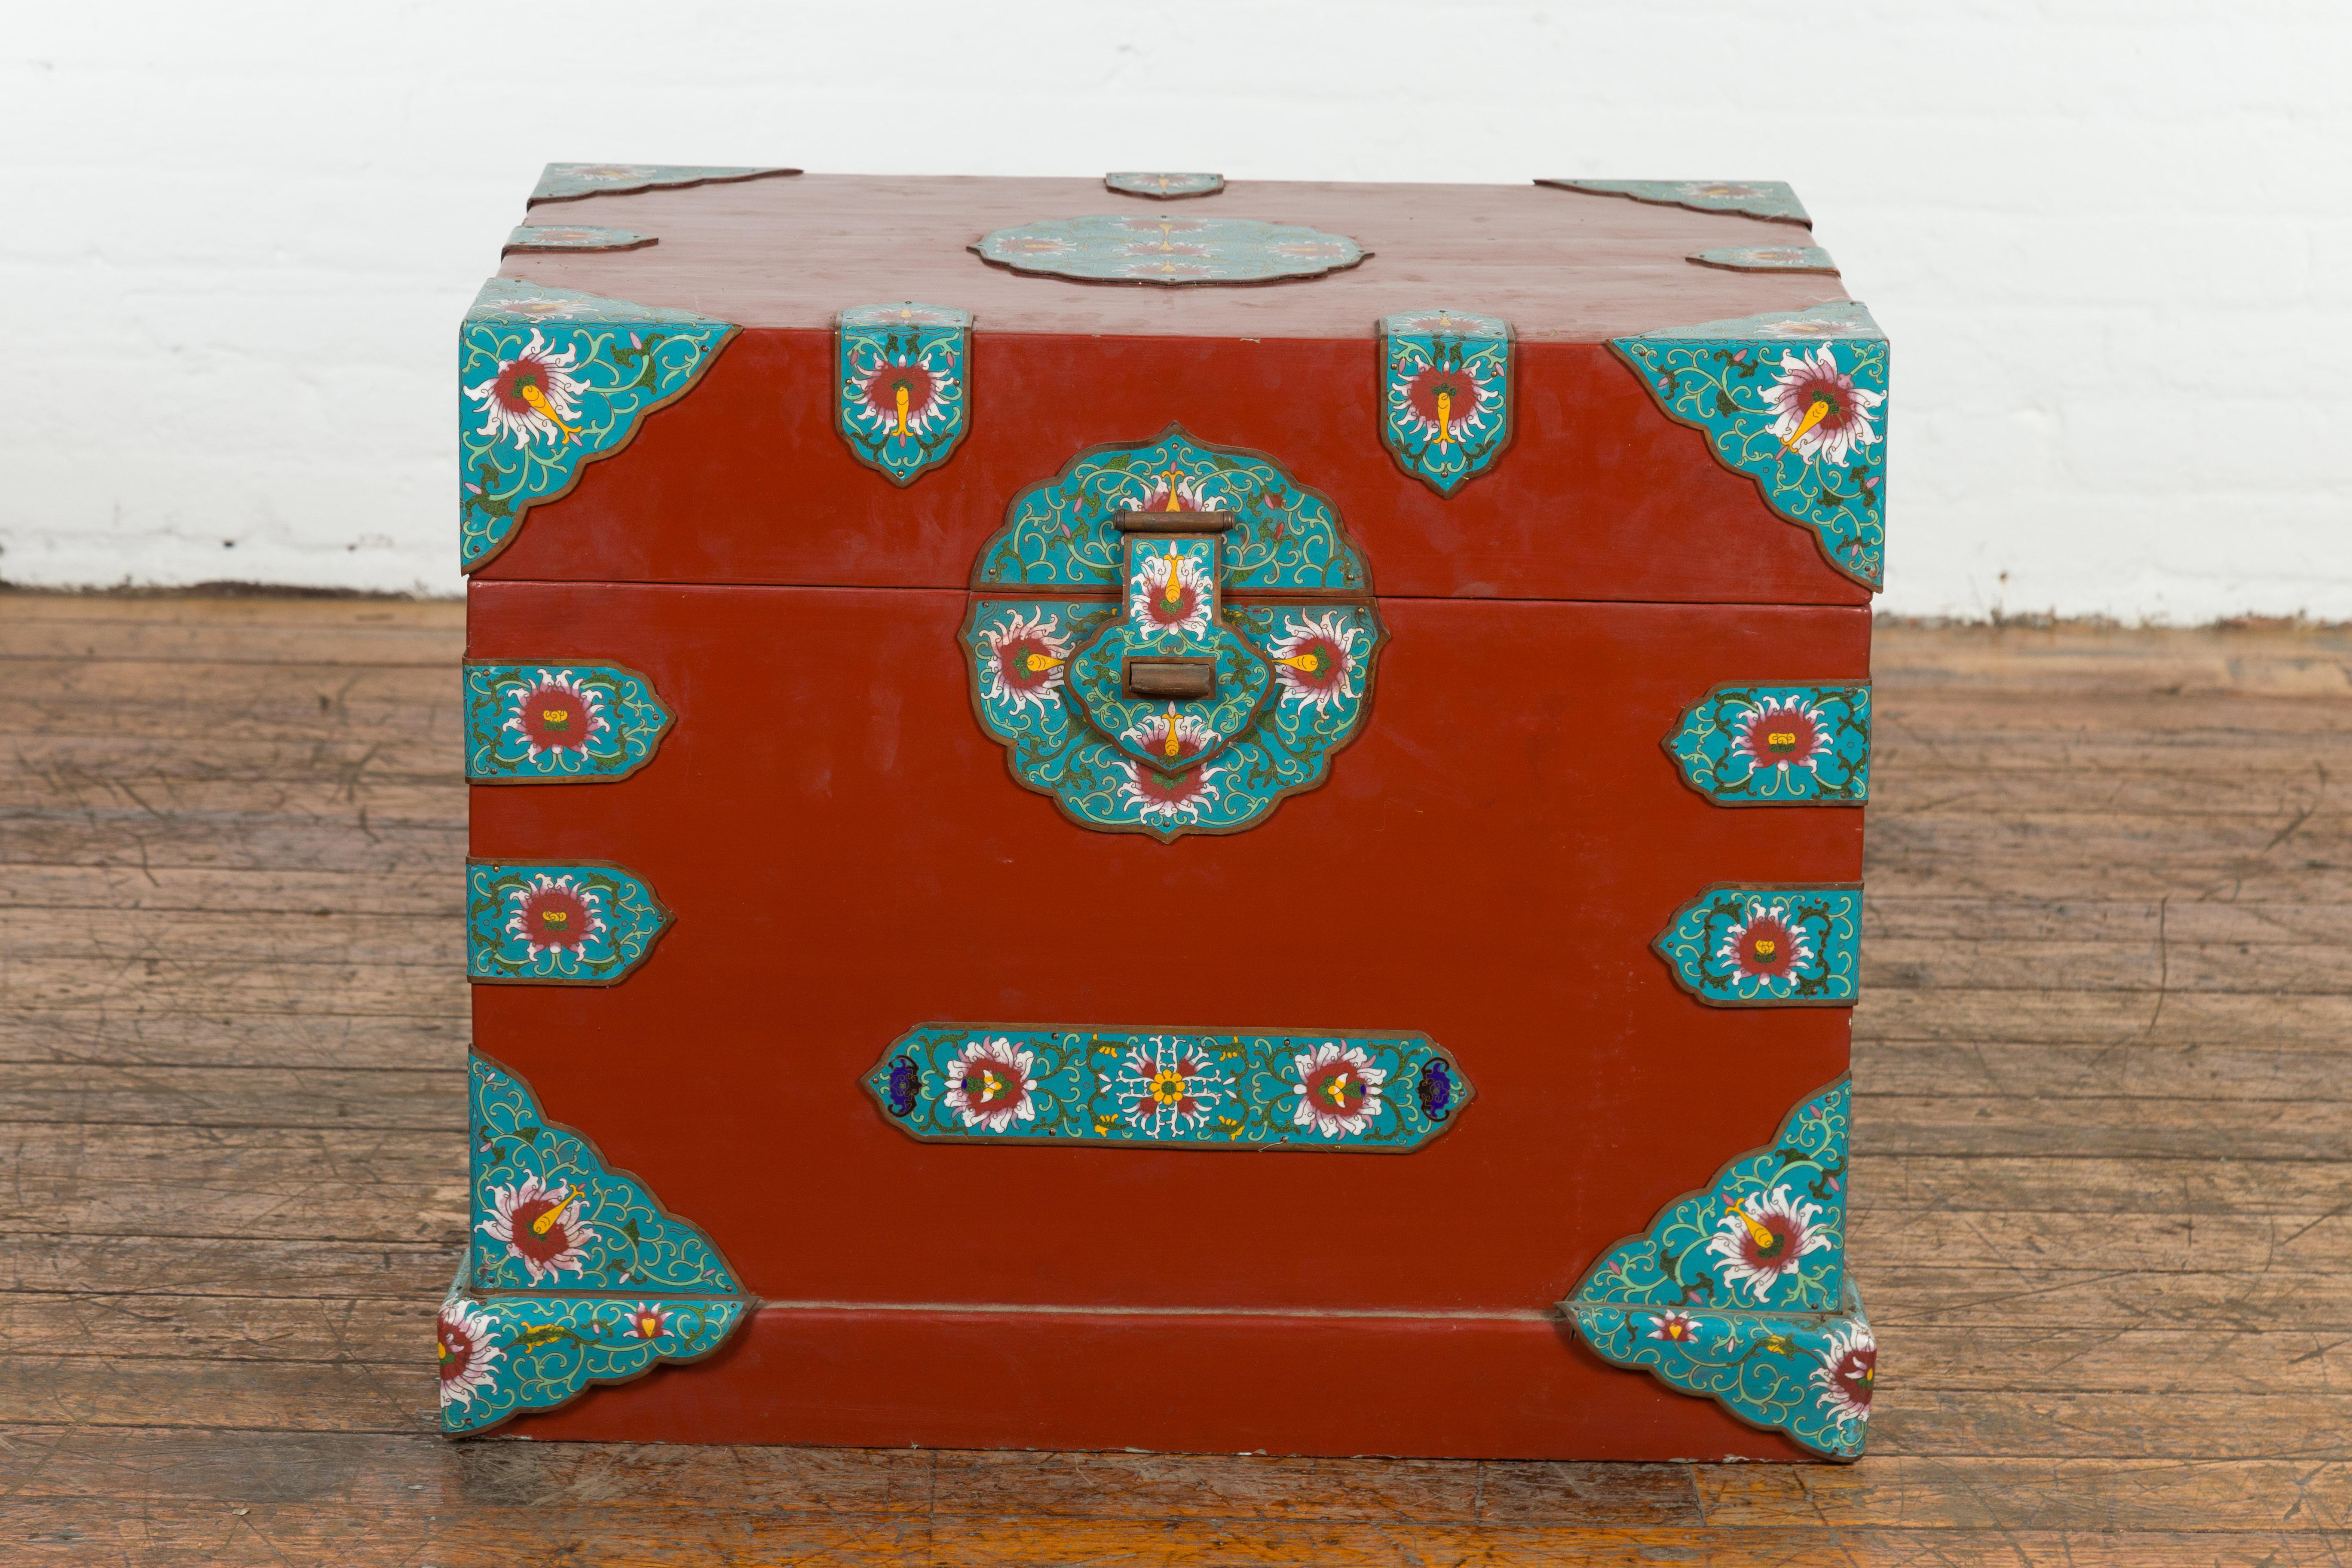 A vintage Chinese blanket chest from the mid 20th century with red lacquer ground, cloisonné décor and lateral handles. Created in China during the midcentury period, this blanket chest features a rectangular lid adorned with an ornate cloisonné